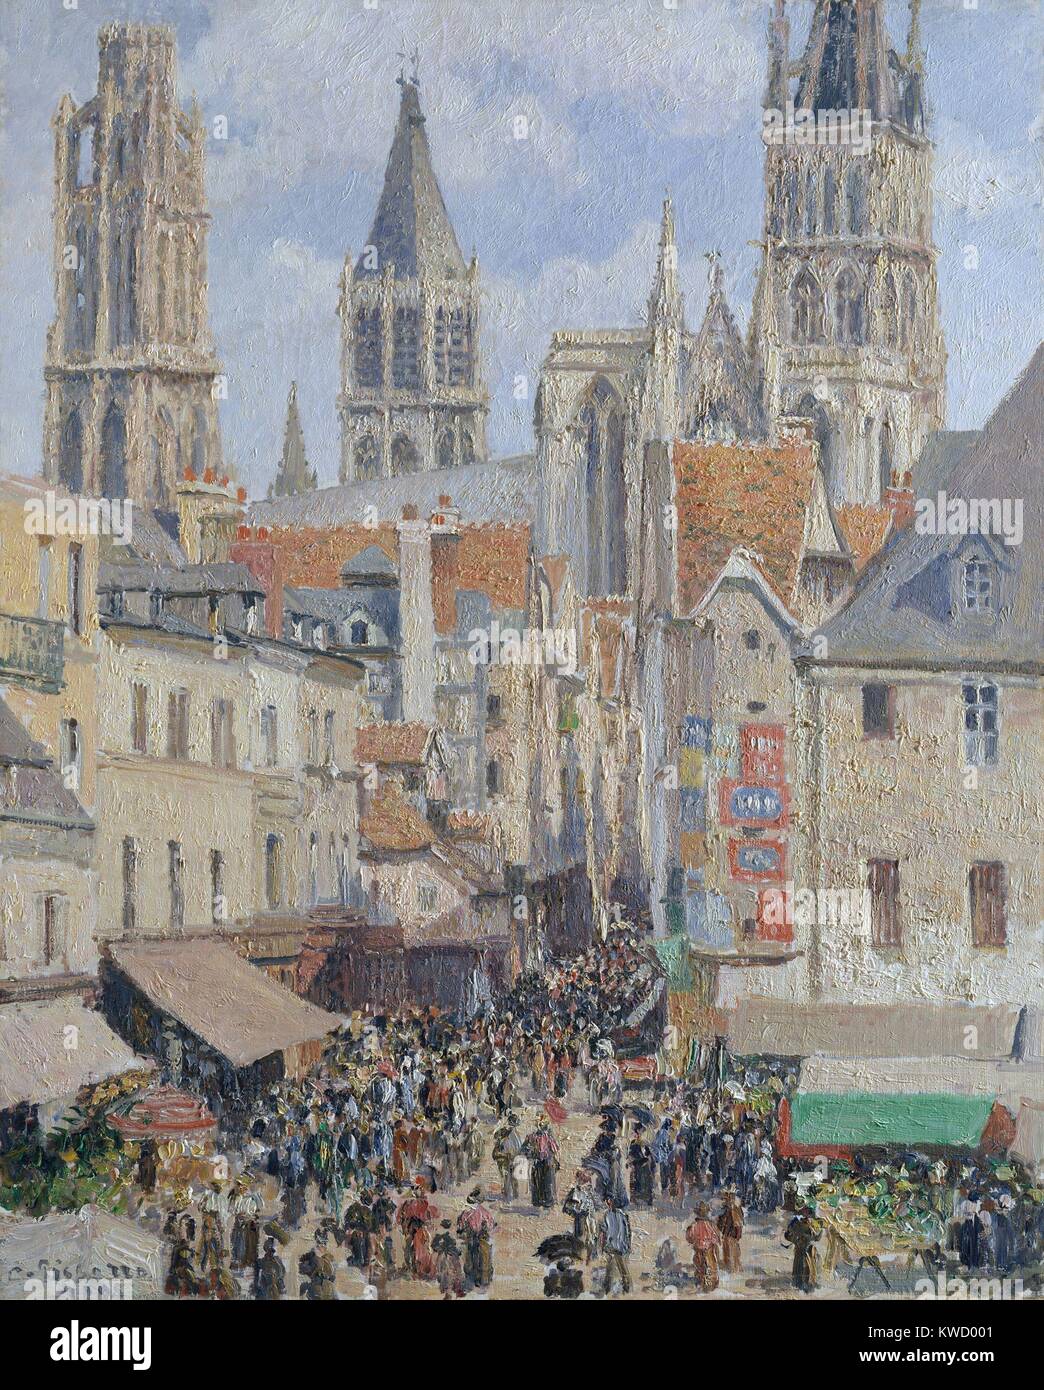 Rue de lEpicerie, Rouen (Effect of Sunlight), by Camille Pissarro, 1898, impressionist oil painting. The painting shows a market in progress and the spires of Rouen Cathedral (BSLOC 2017 3 64) Stock Photo